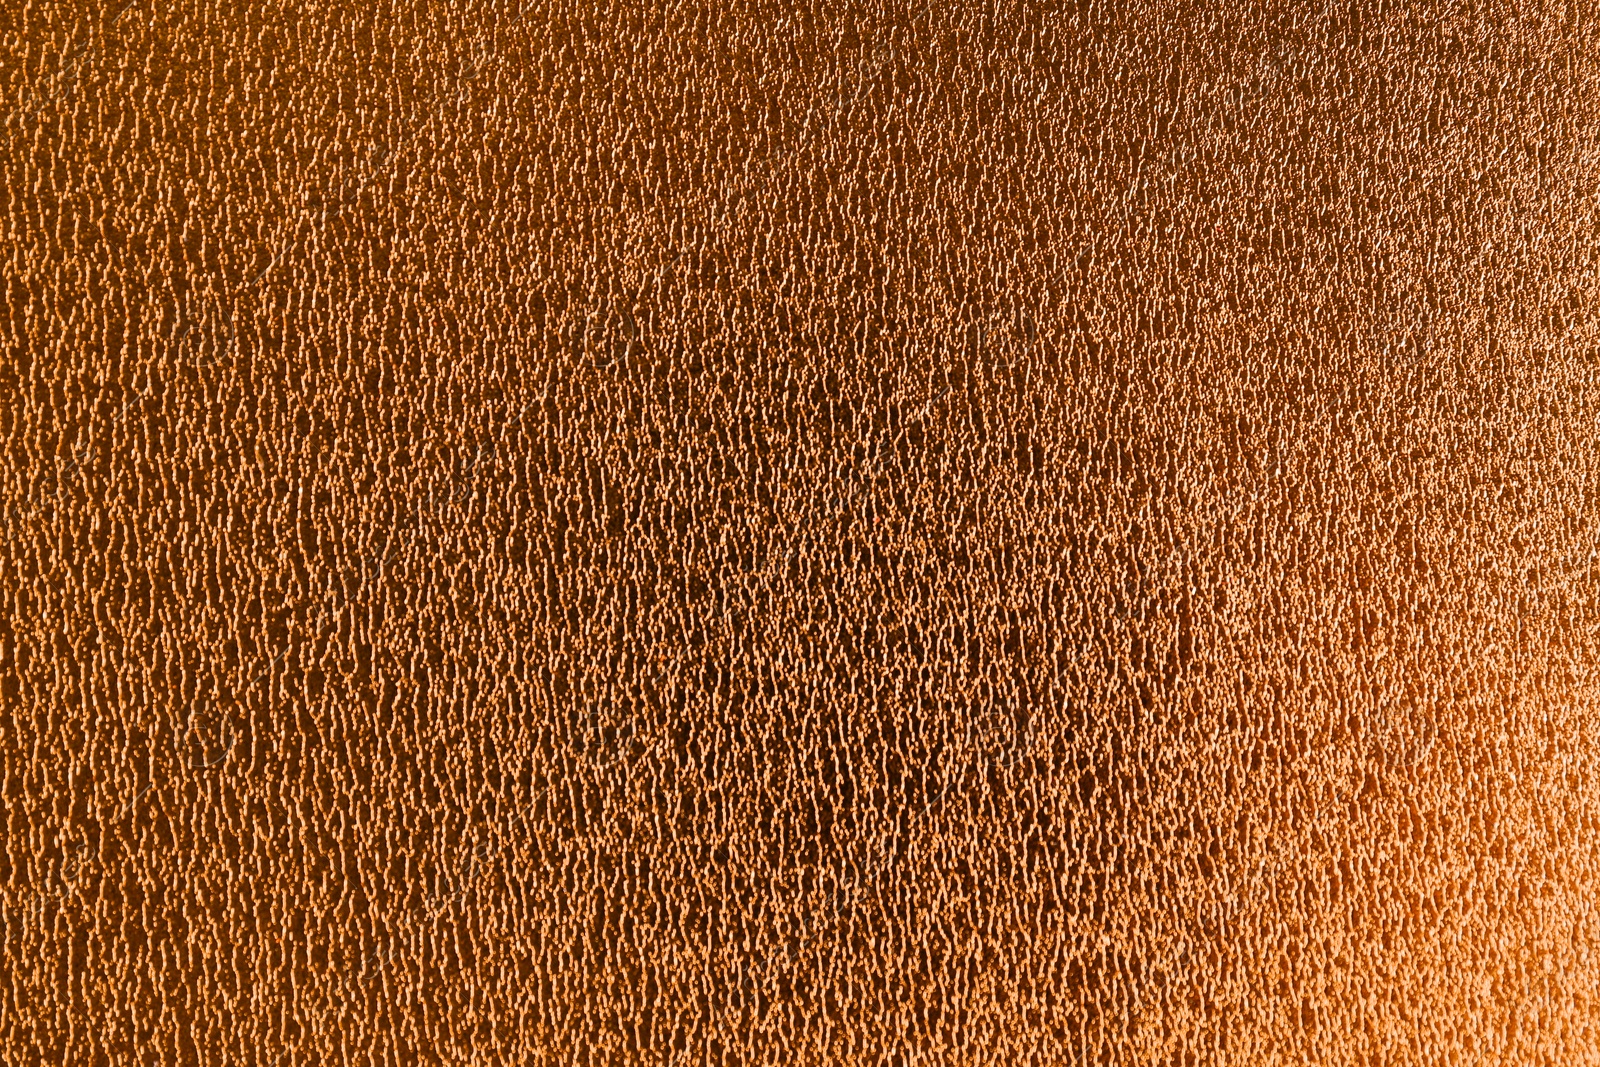 Photo of Golden textured surface as background, closeup view